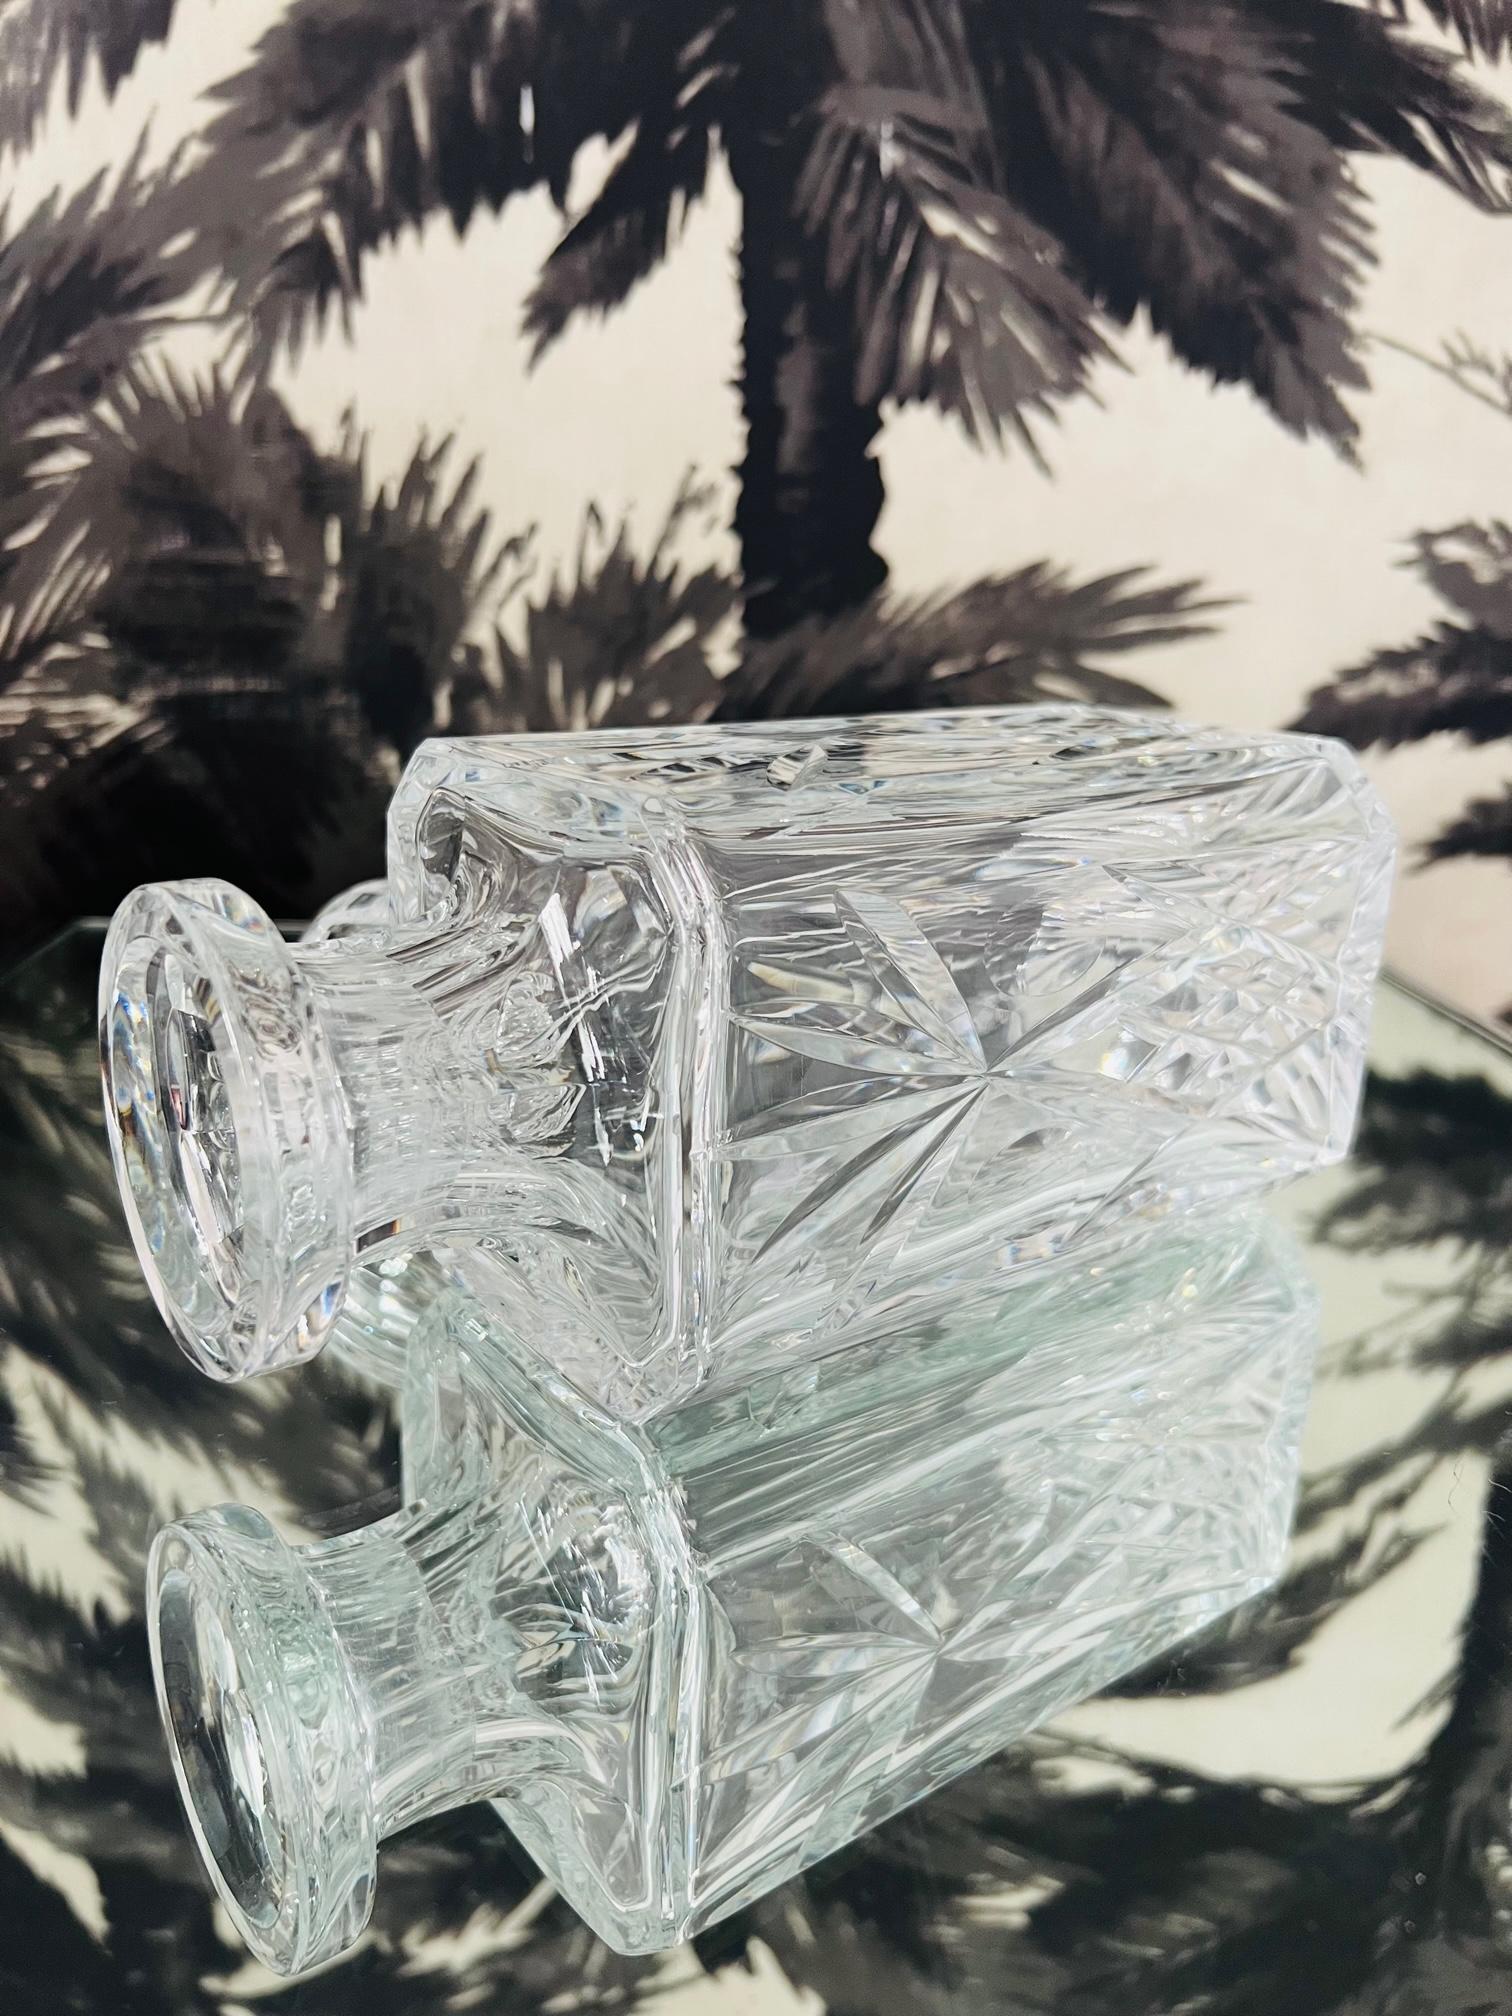 Irish Vintage Waterford Crystal Whiskey Decanter with Etched Designs, C. 1980